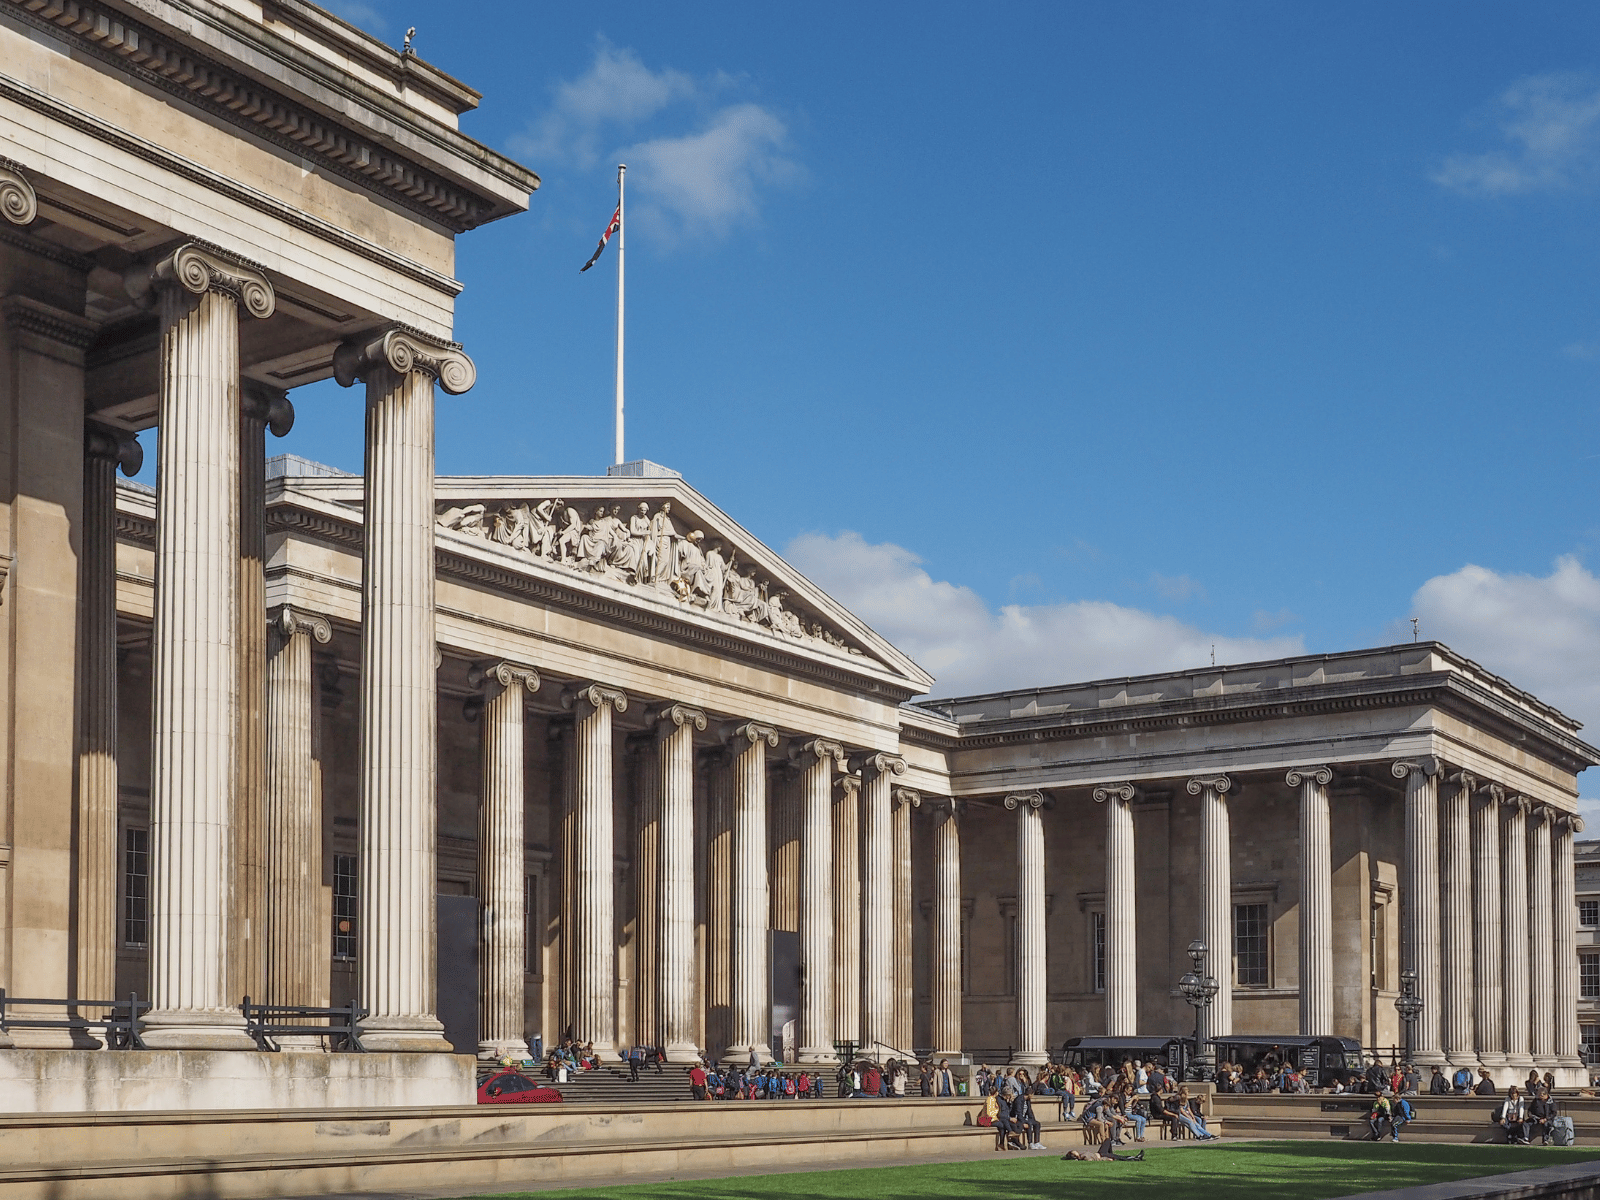 Image of the Facade and Grounds of British Museum